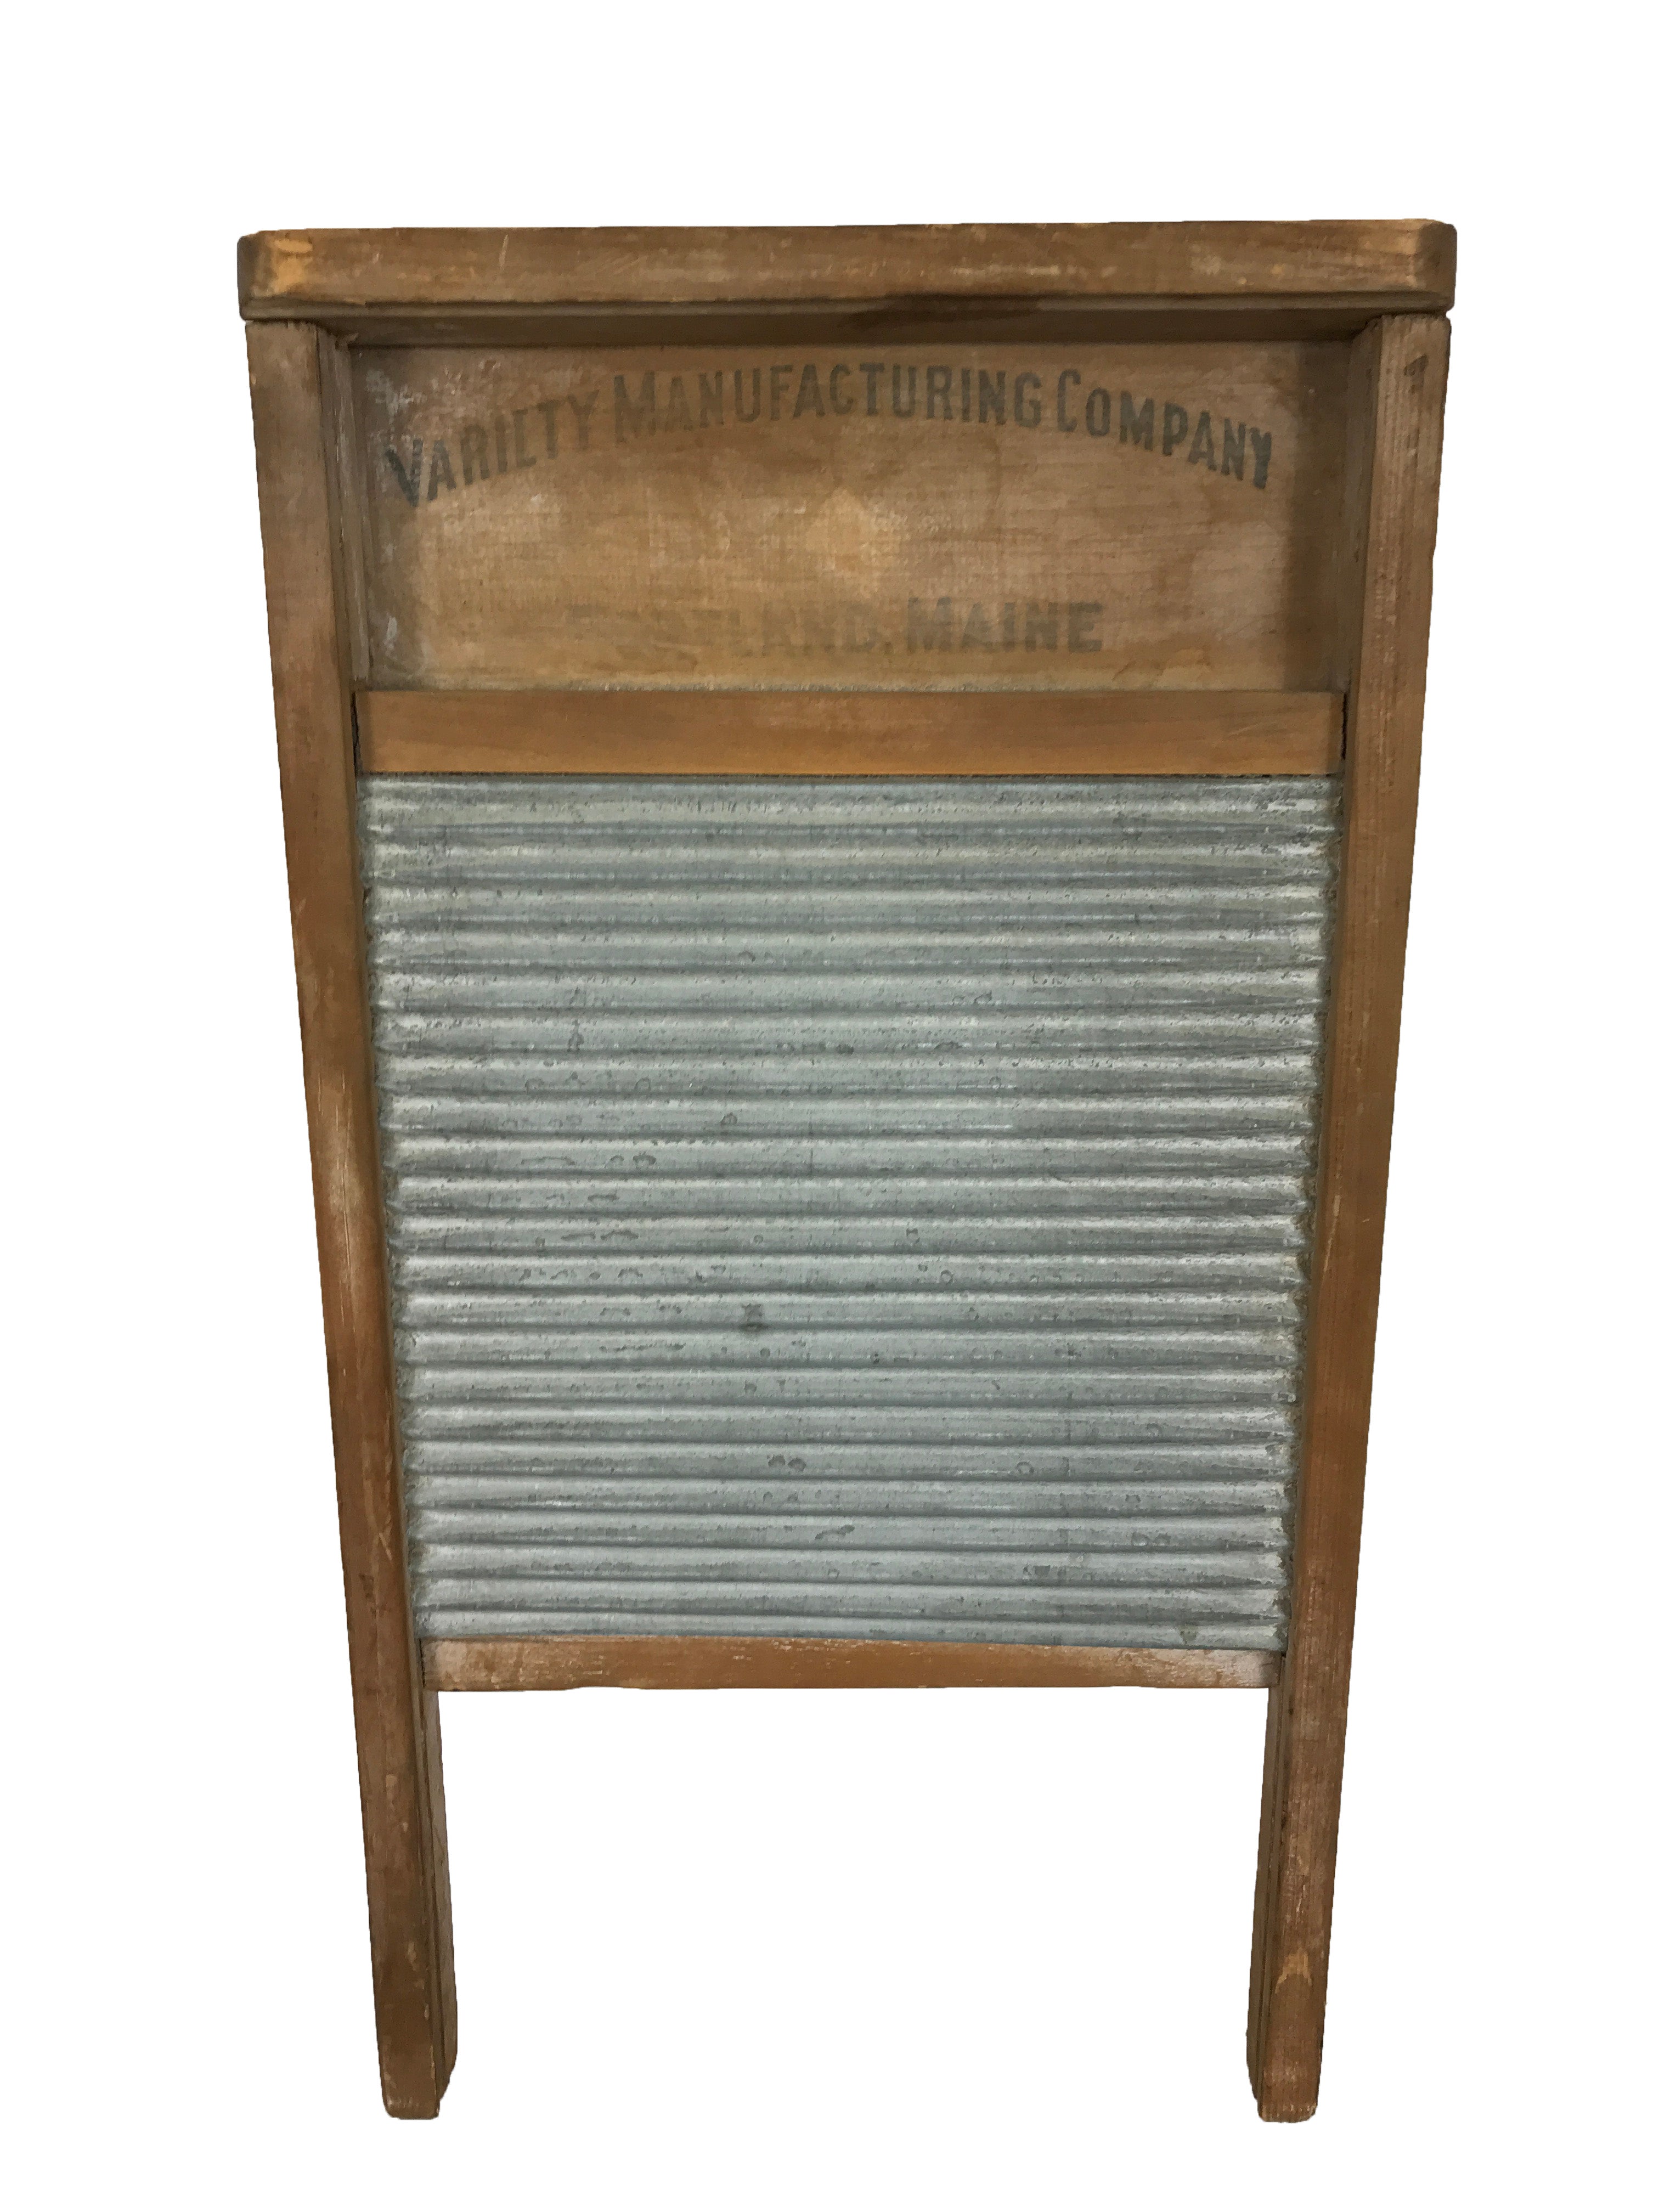 Variety Mfg. Co. Washboard with Ribbed Galvanized Metal Portland Maine